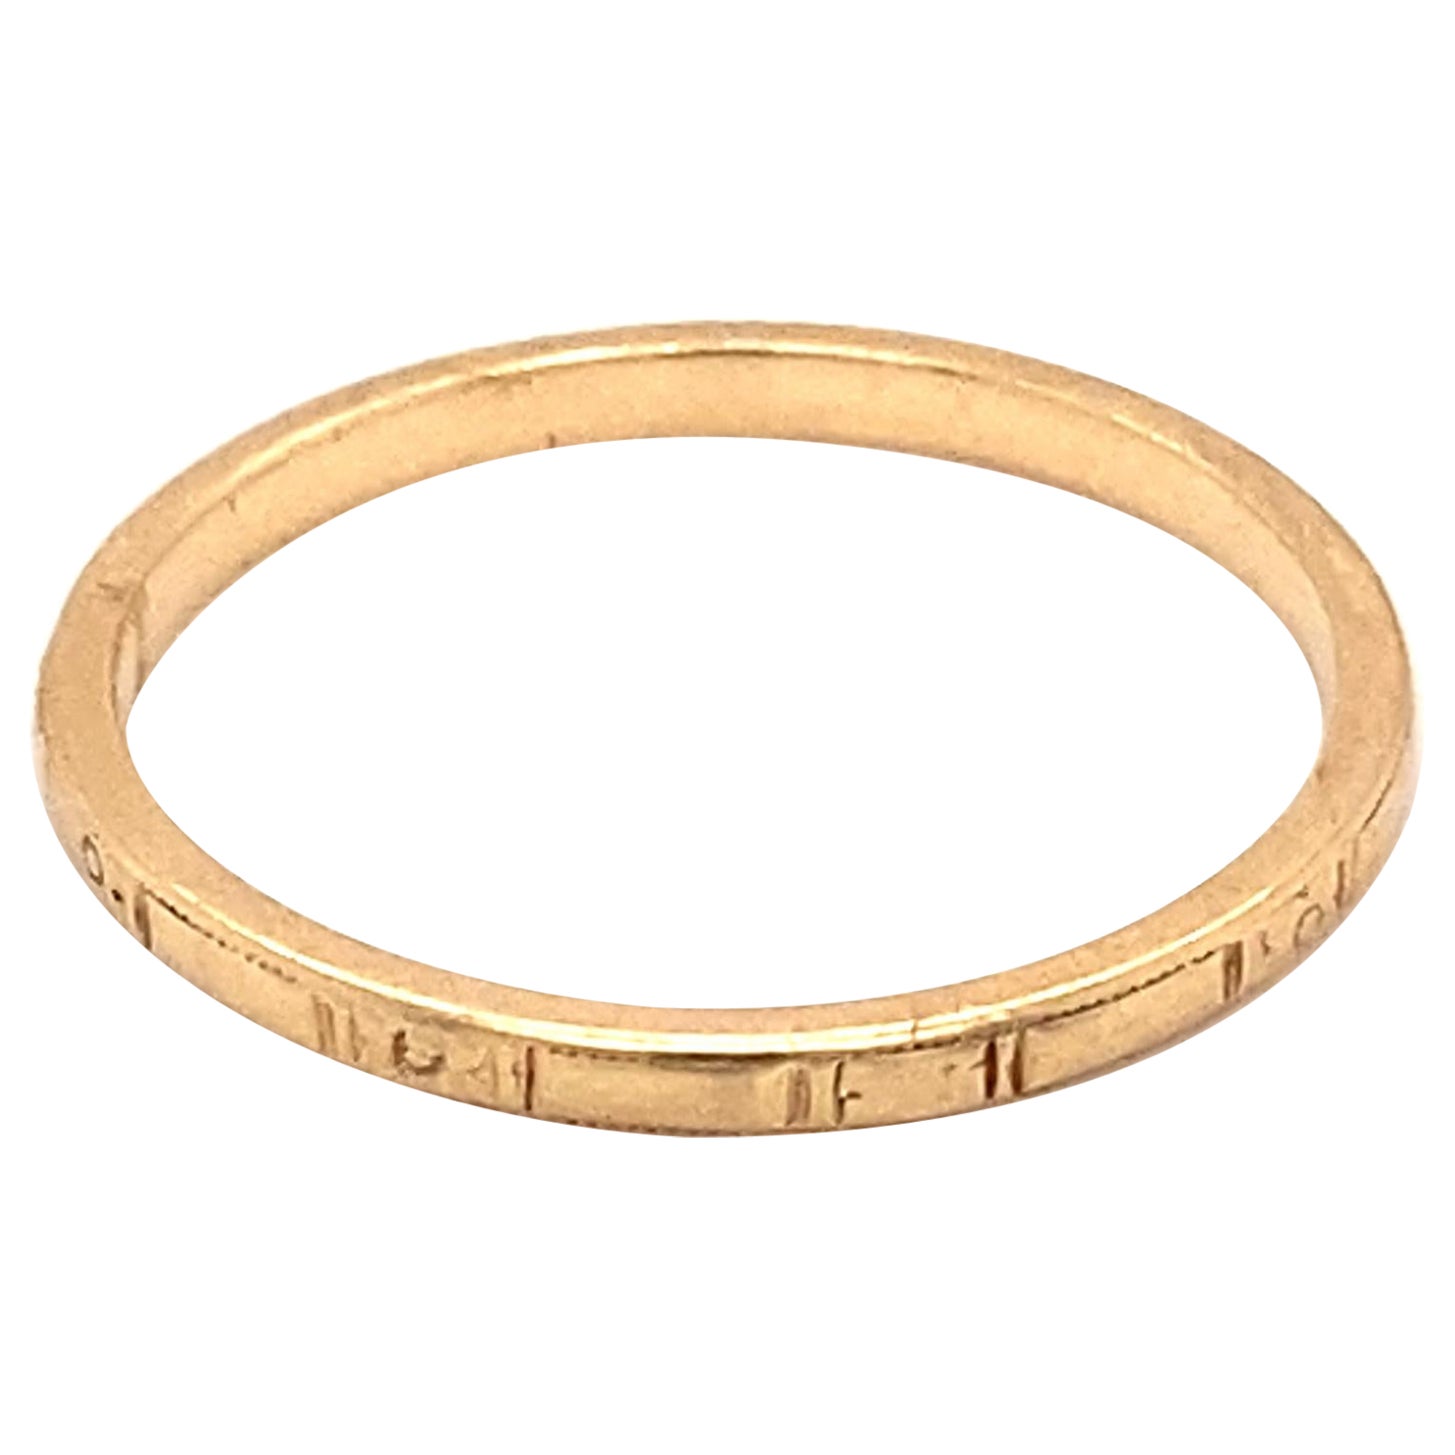 Circa 1920s Art Deco Etched Wedding Band Ring in 14 Karat Yellow Gold For Sale